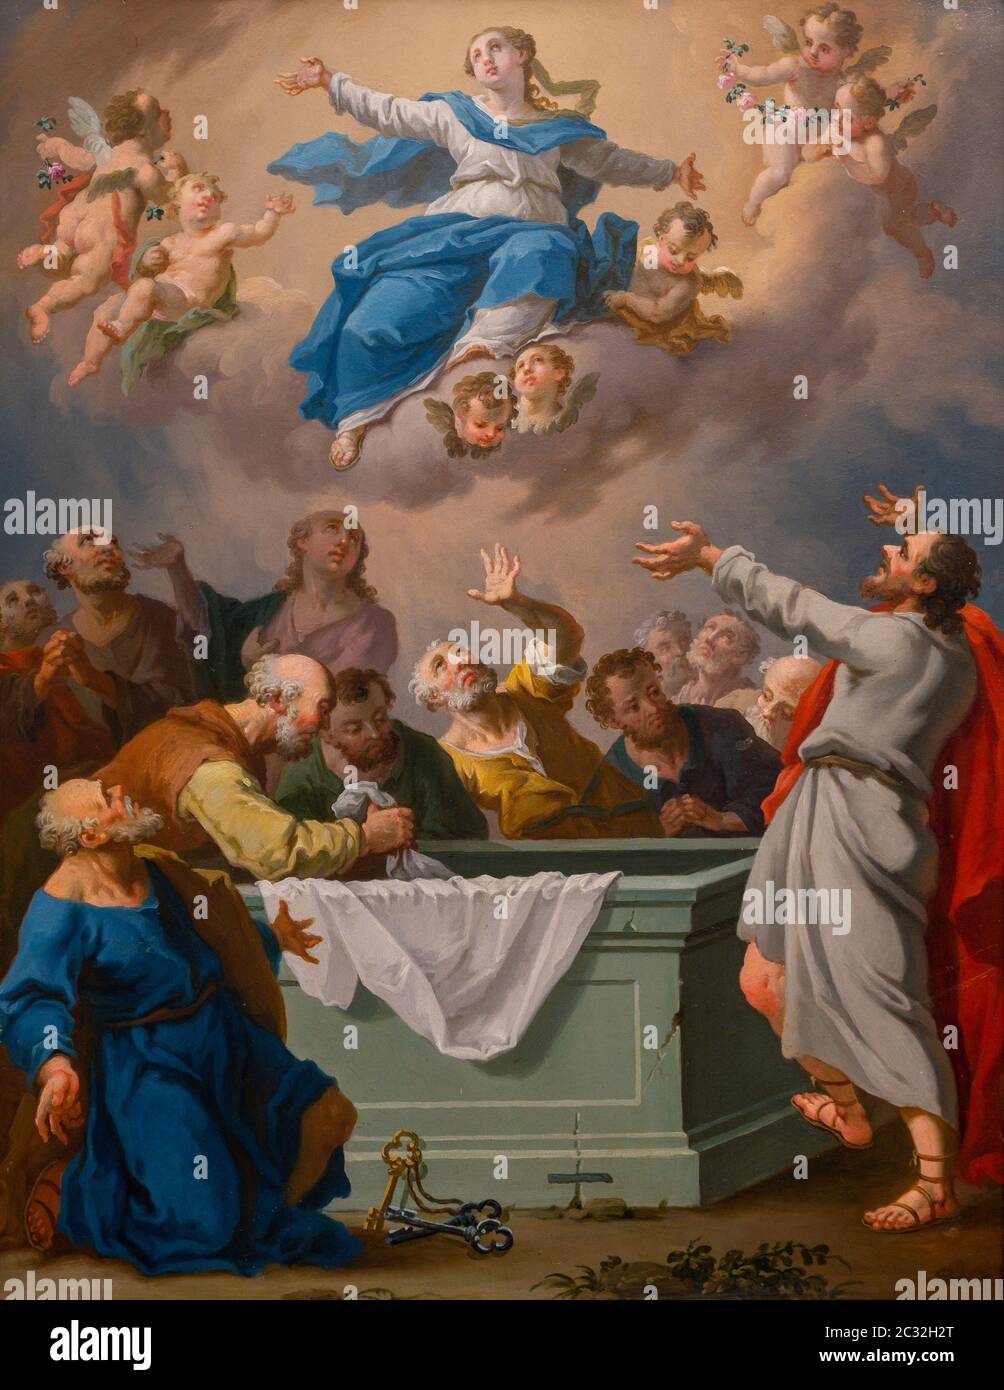 The Assumption of the Virgin Mary. Late 18th century. Central European painter after Sebastiano Ricci. Stock Photo